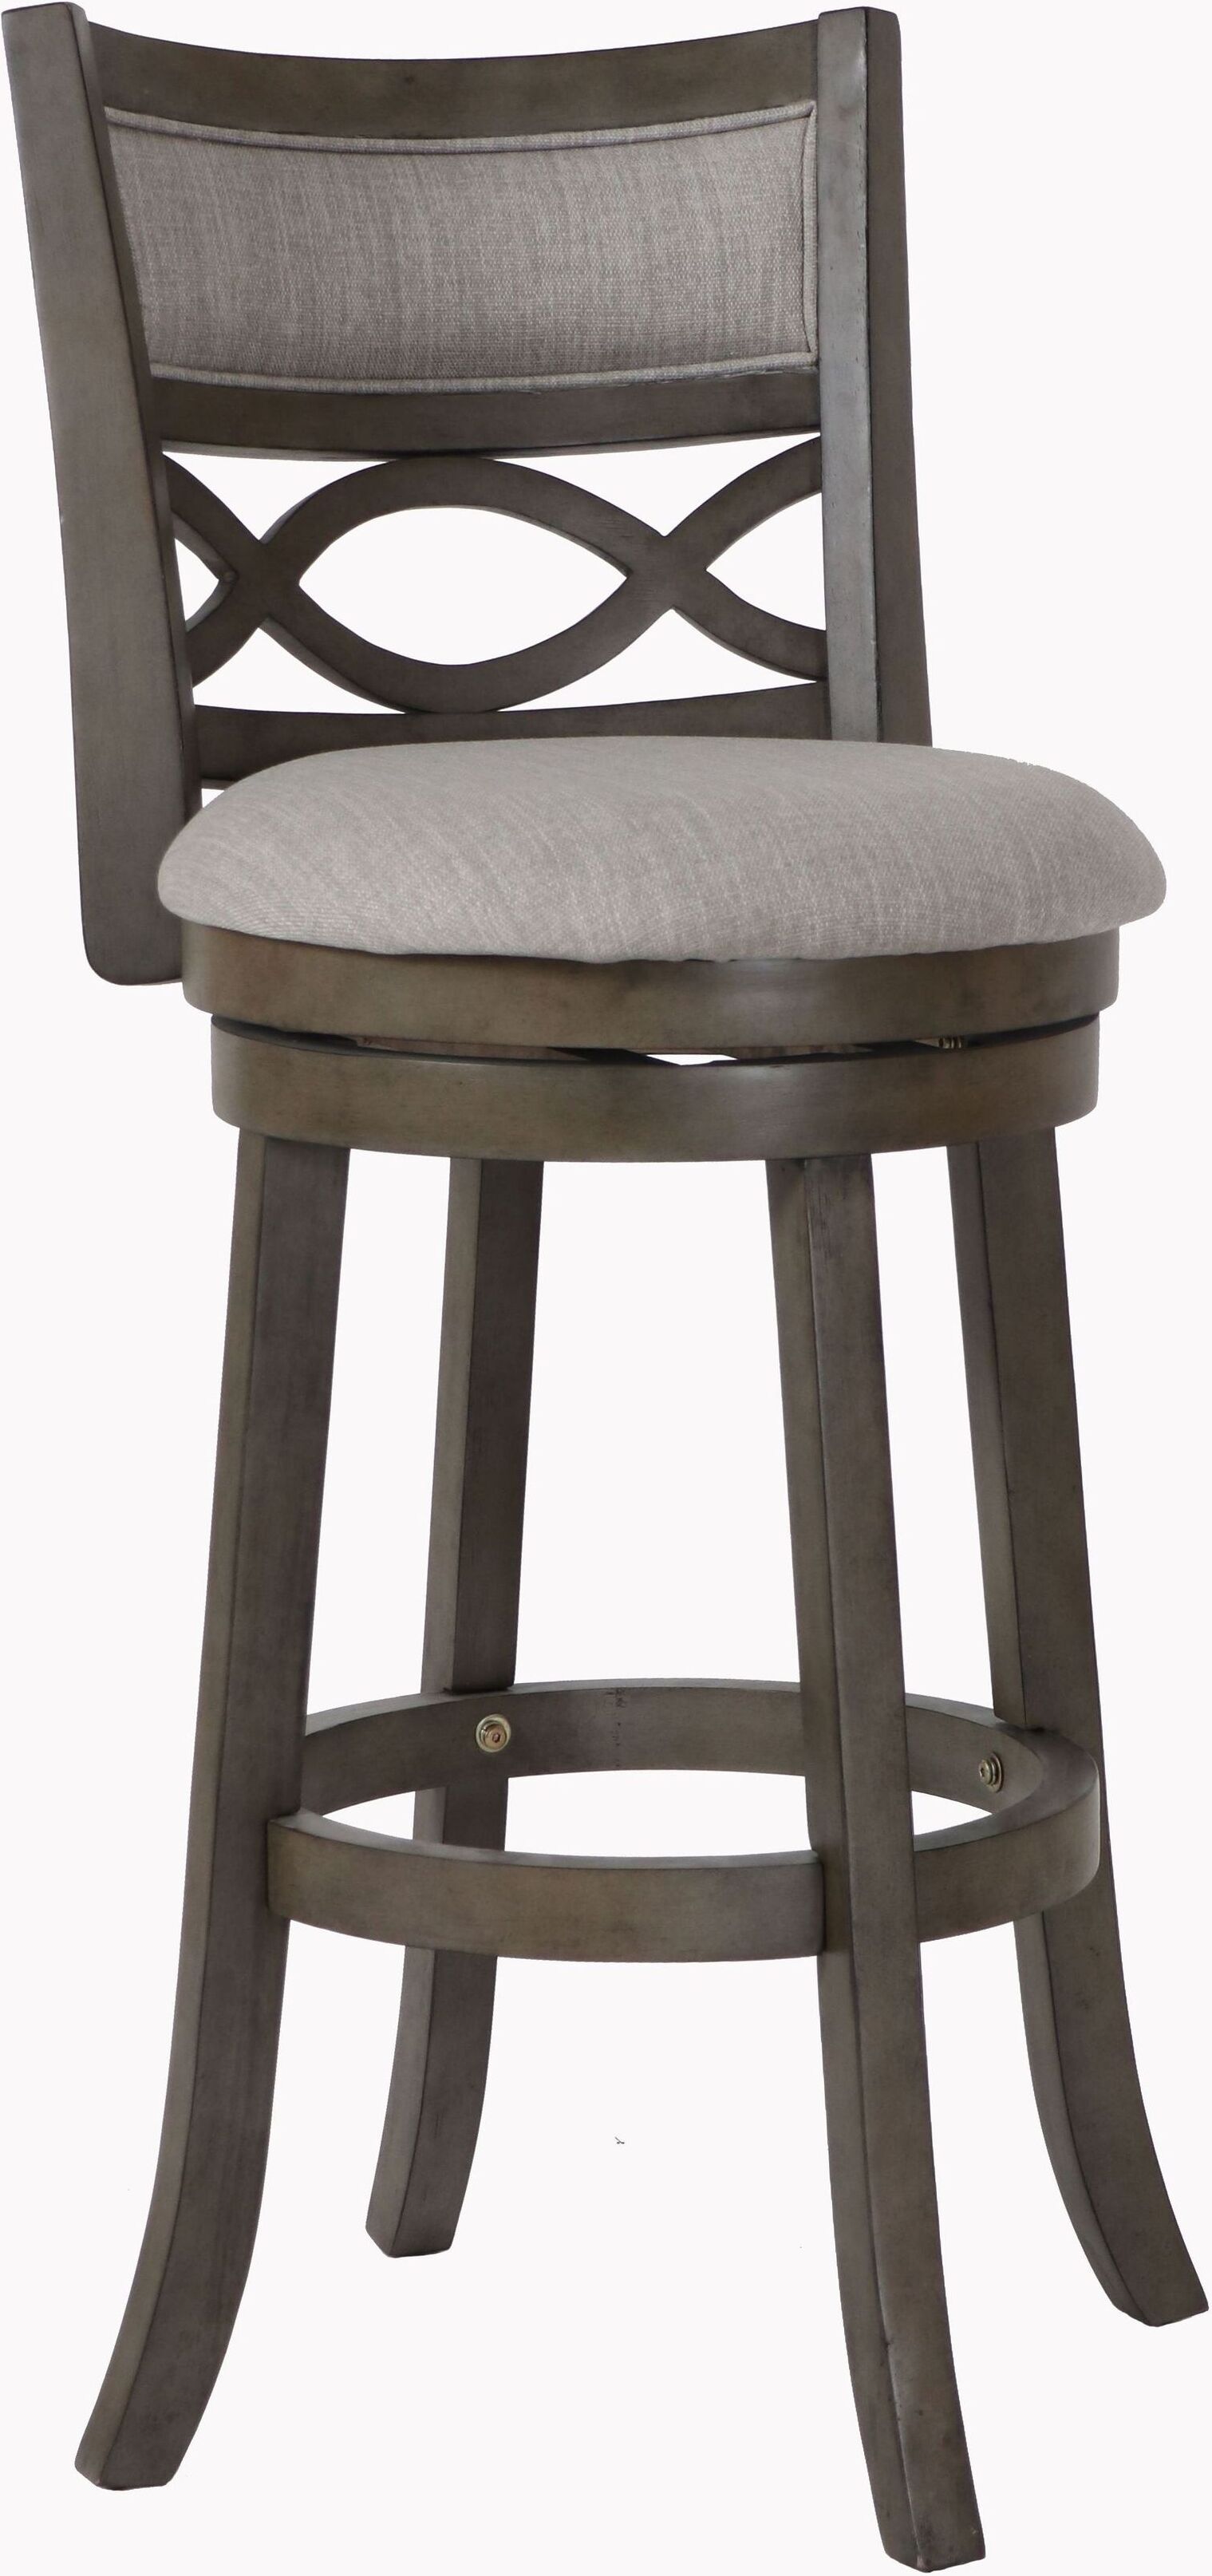 Manchester Antique Gray 29 Inch Bar, 29 Inch Bar Stools